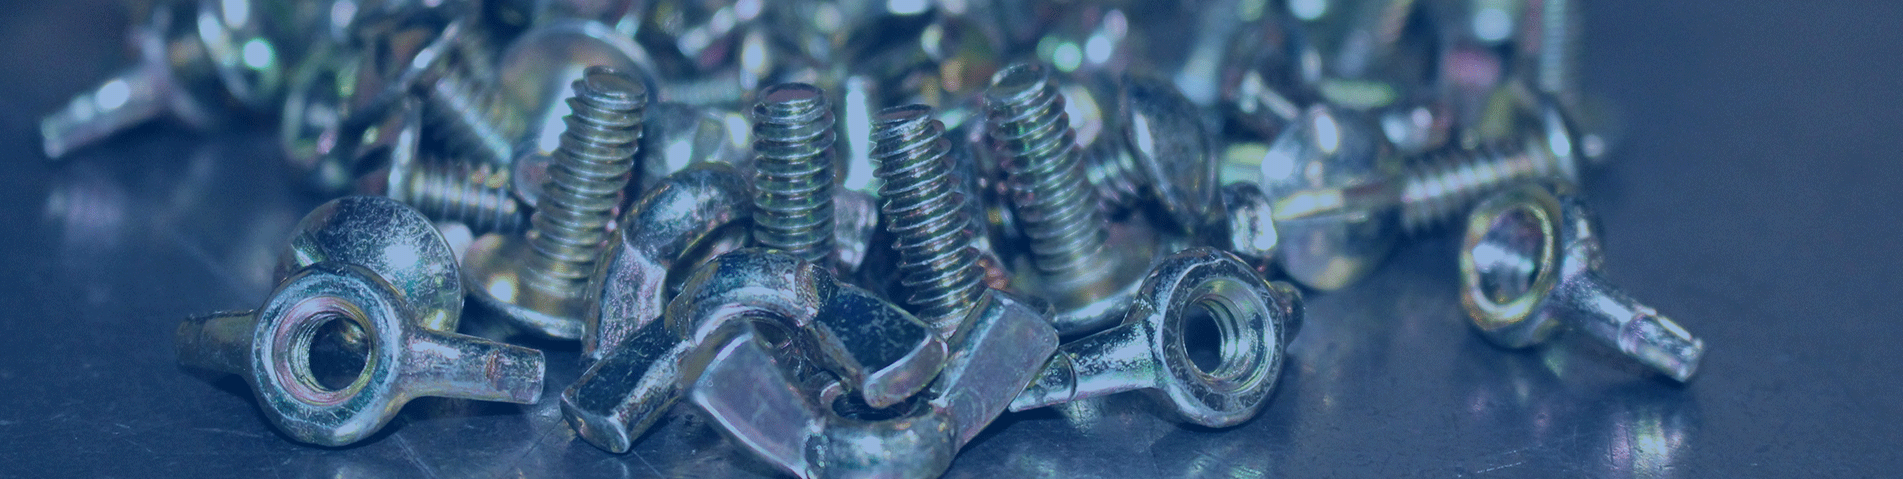 fasteners and industrial supplies on a table